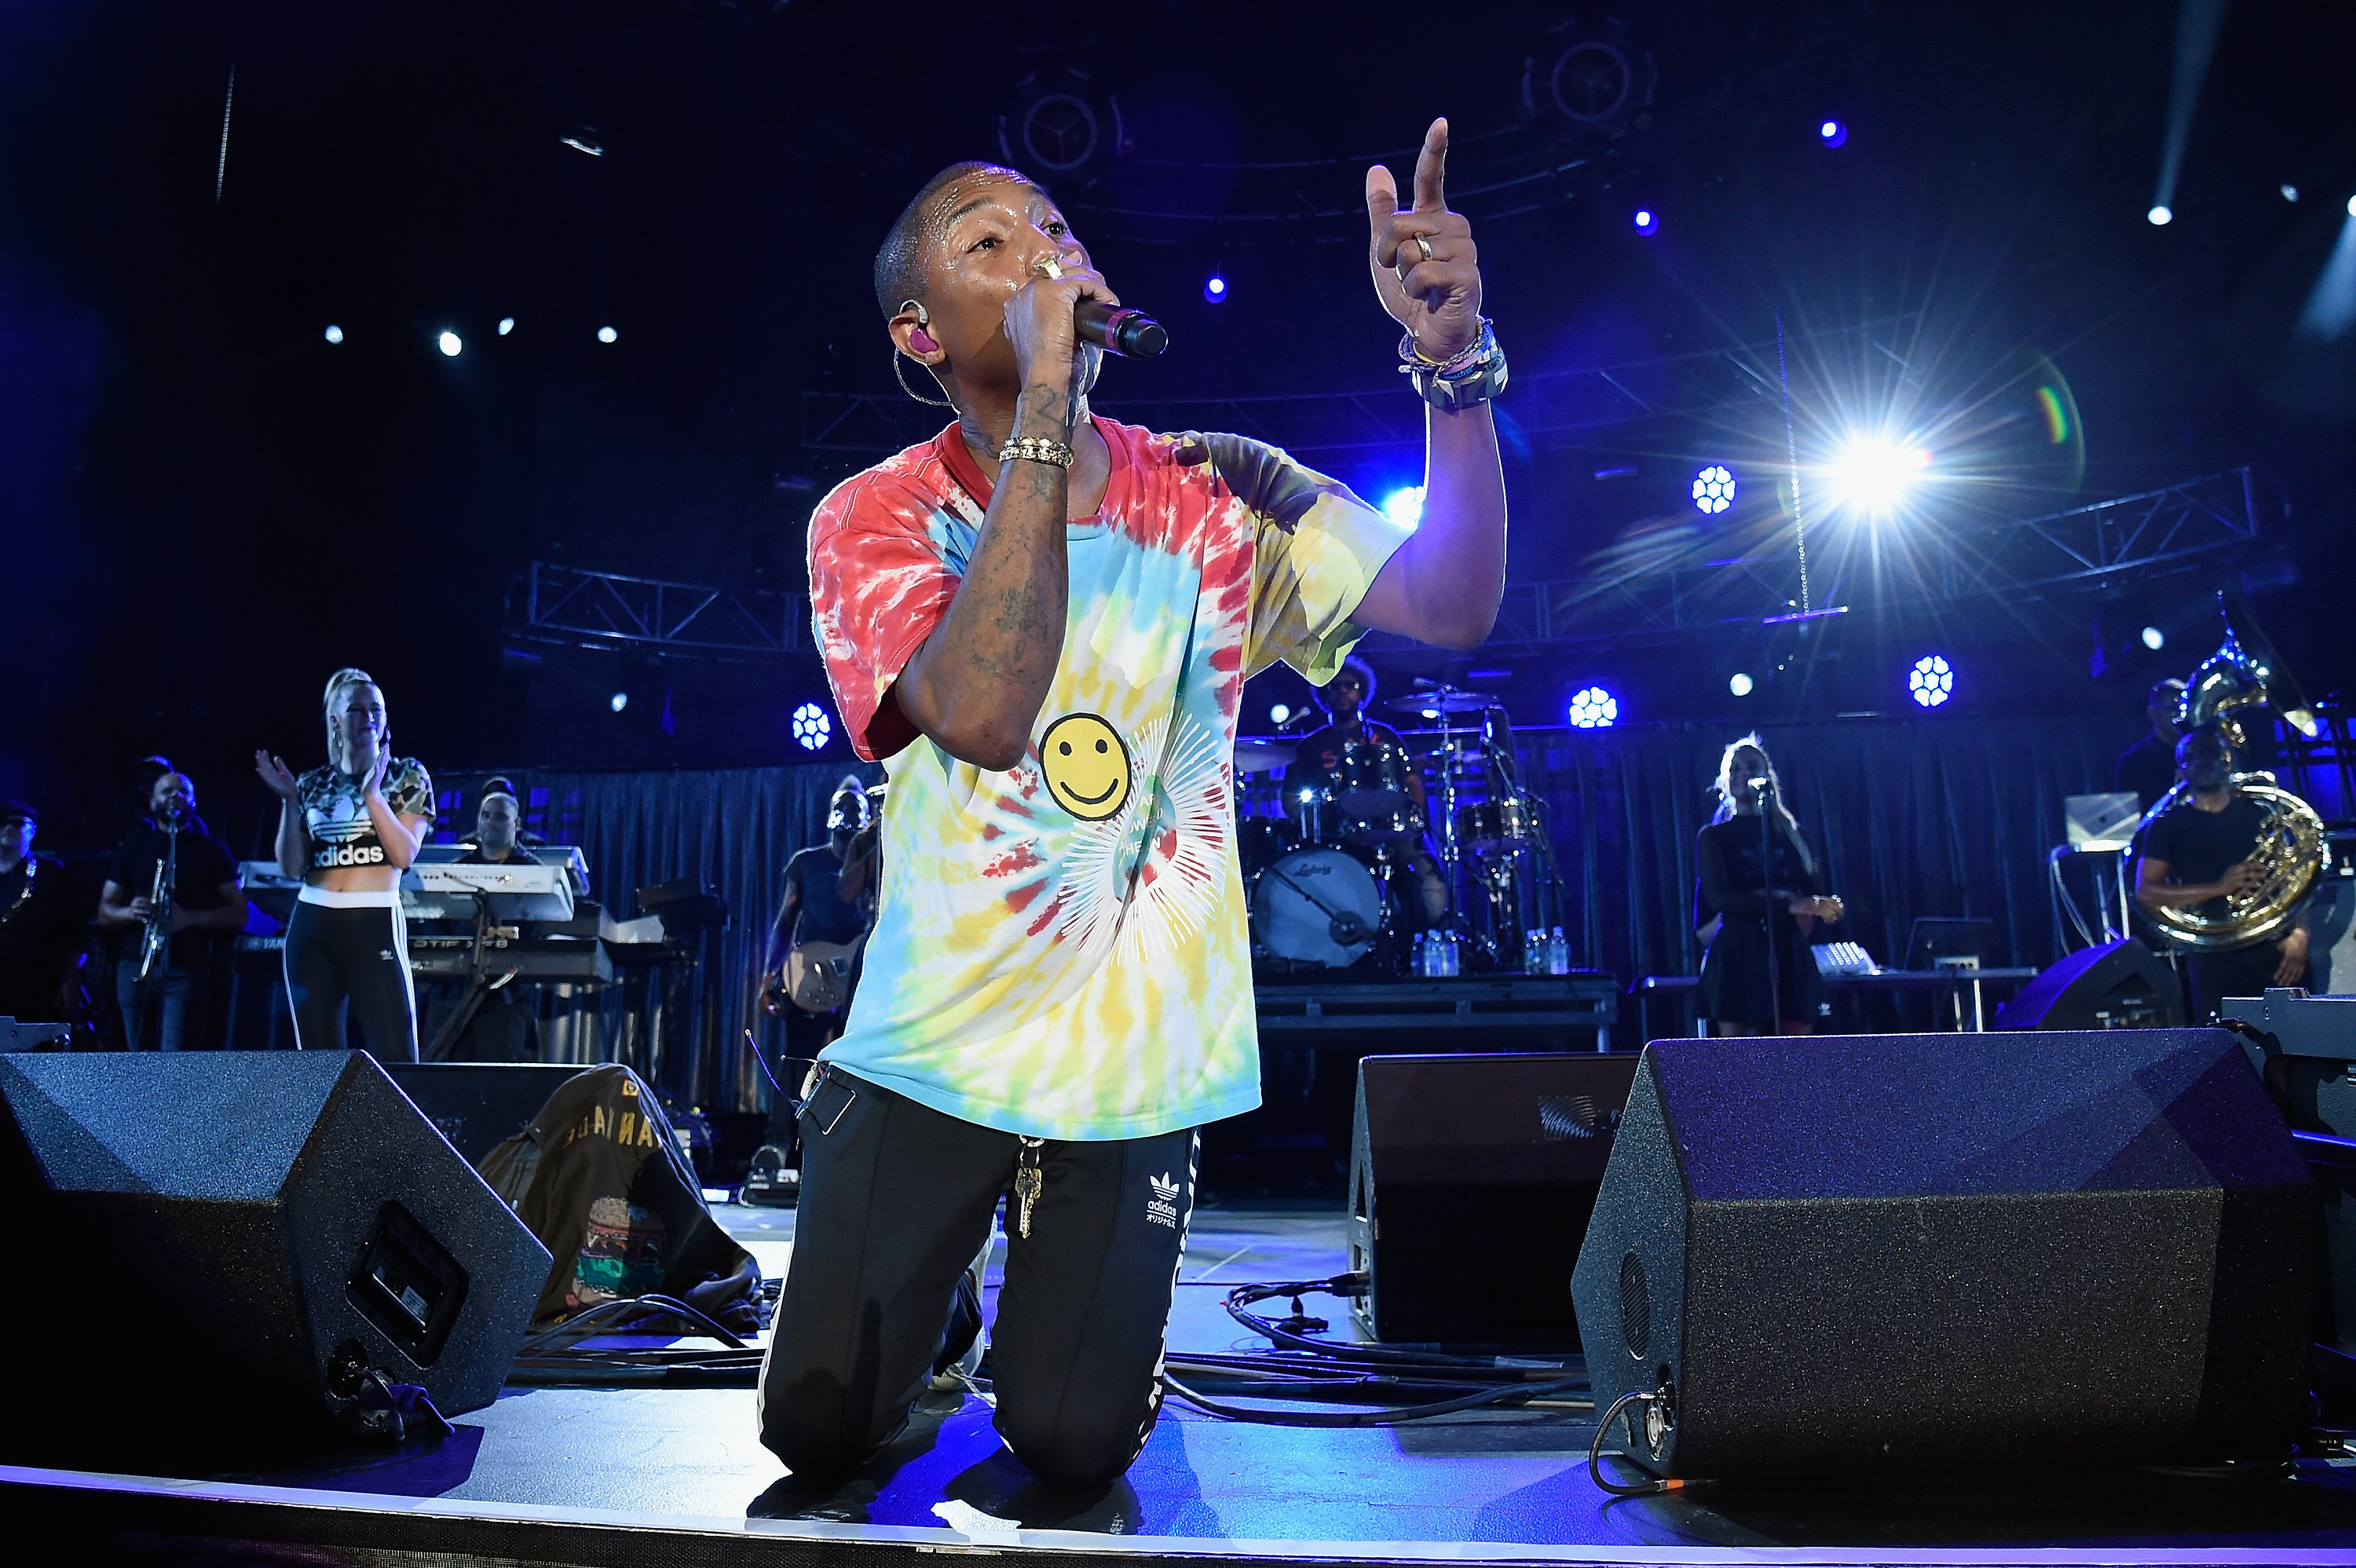 Pharrell Williams performs with The Roots at "A Concert for Charlottesville," at University of Virginia's Scott Stadium in Charlottesville, Va., Sept. 24, 2017. (Kevin Mazur—Getty Images)